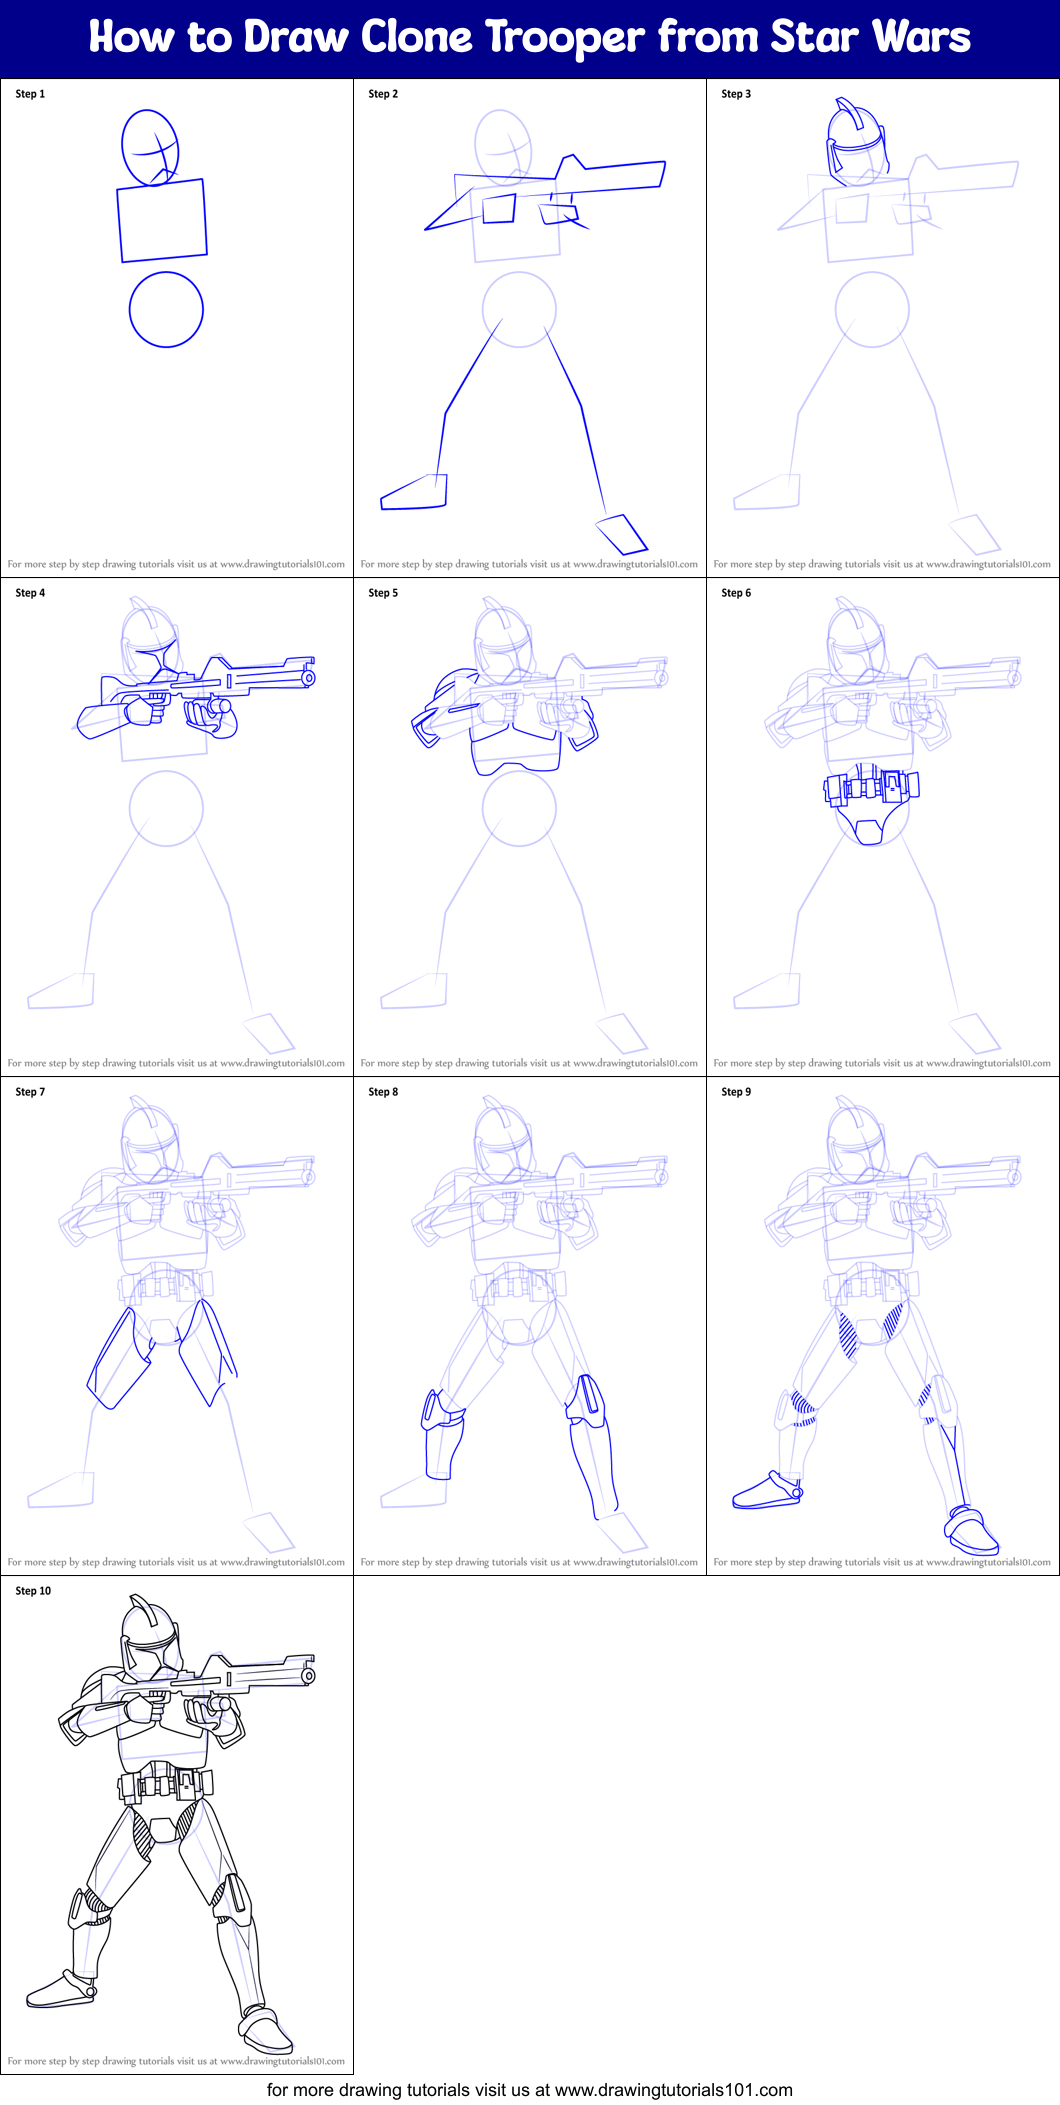 How to Draw Clone Trooper from Star Wars printable step by step drawing